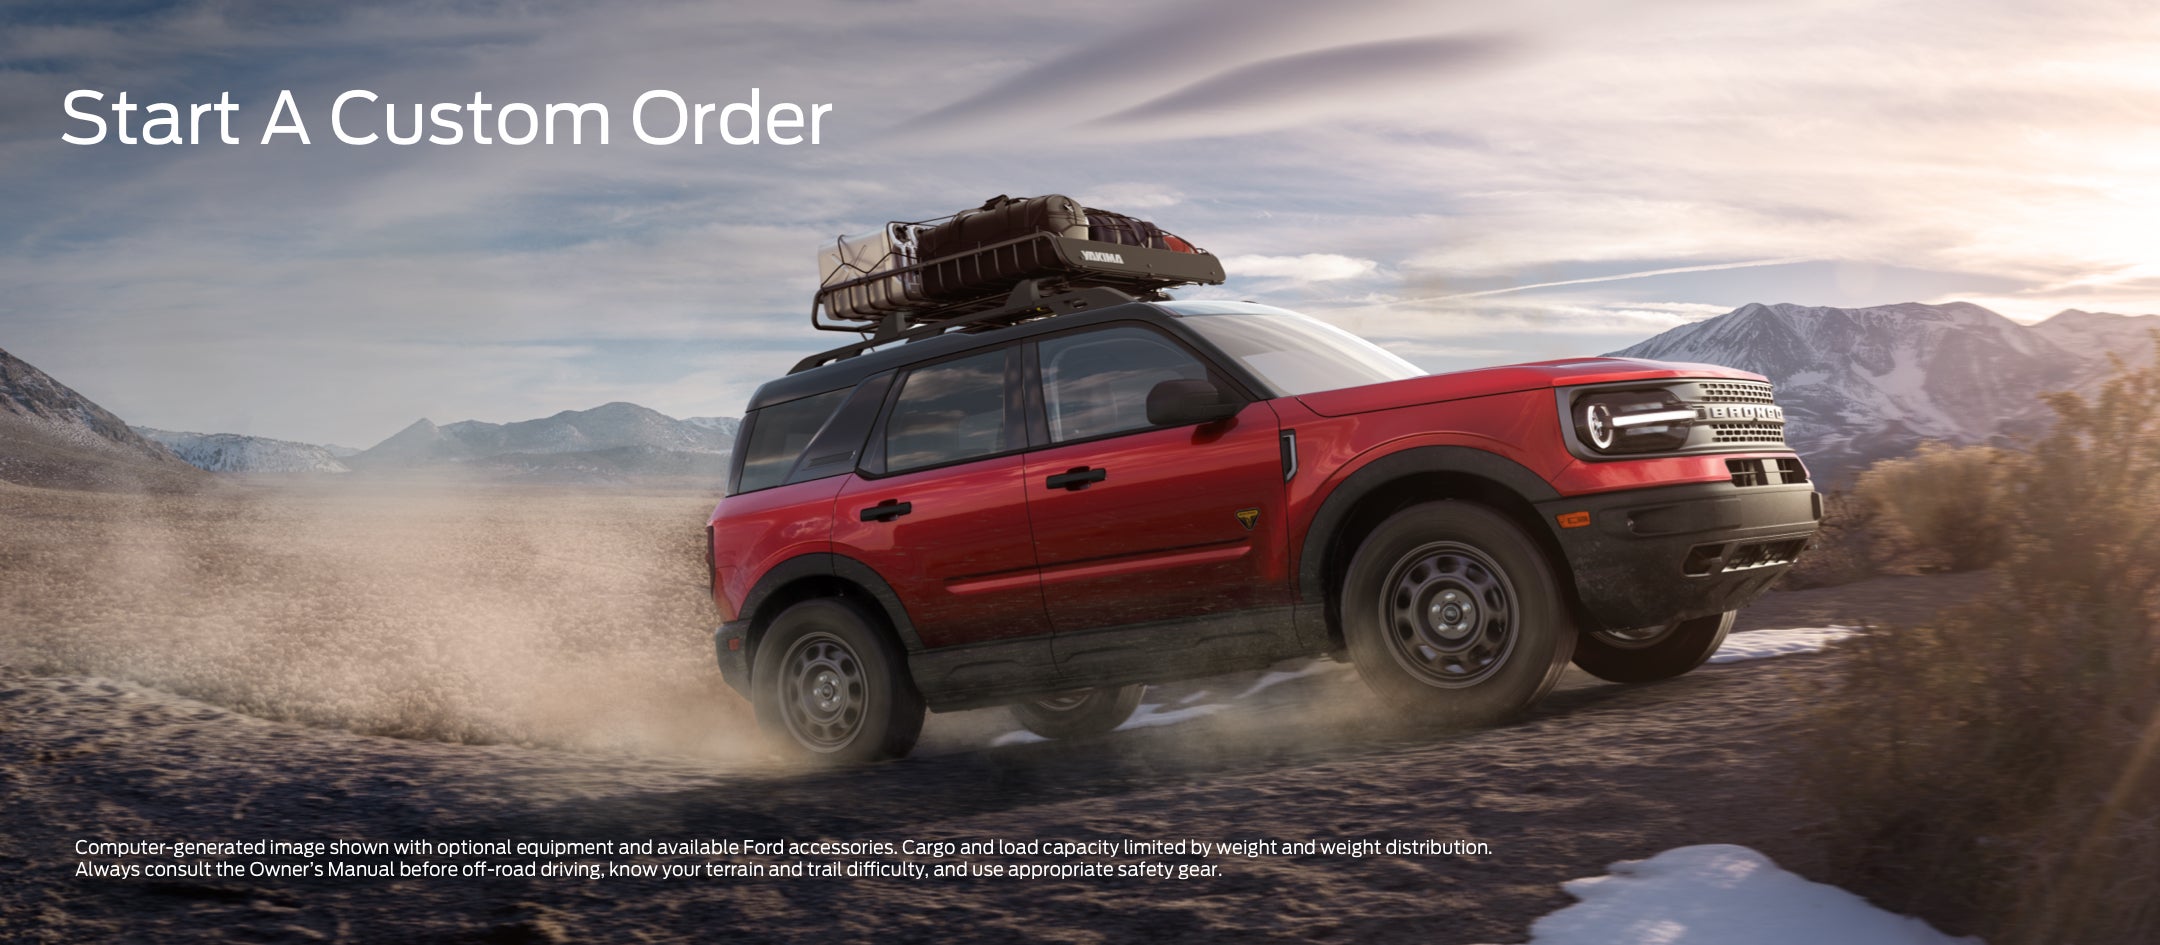 Start a custom order | Crater Lake Ford in Medford OR